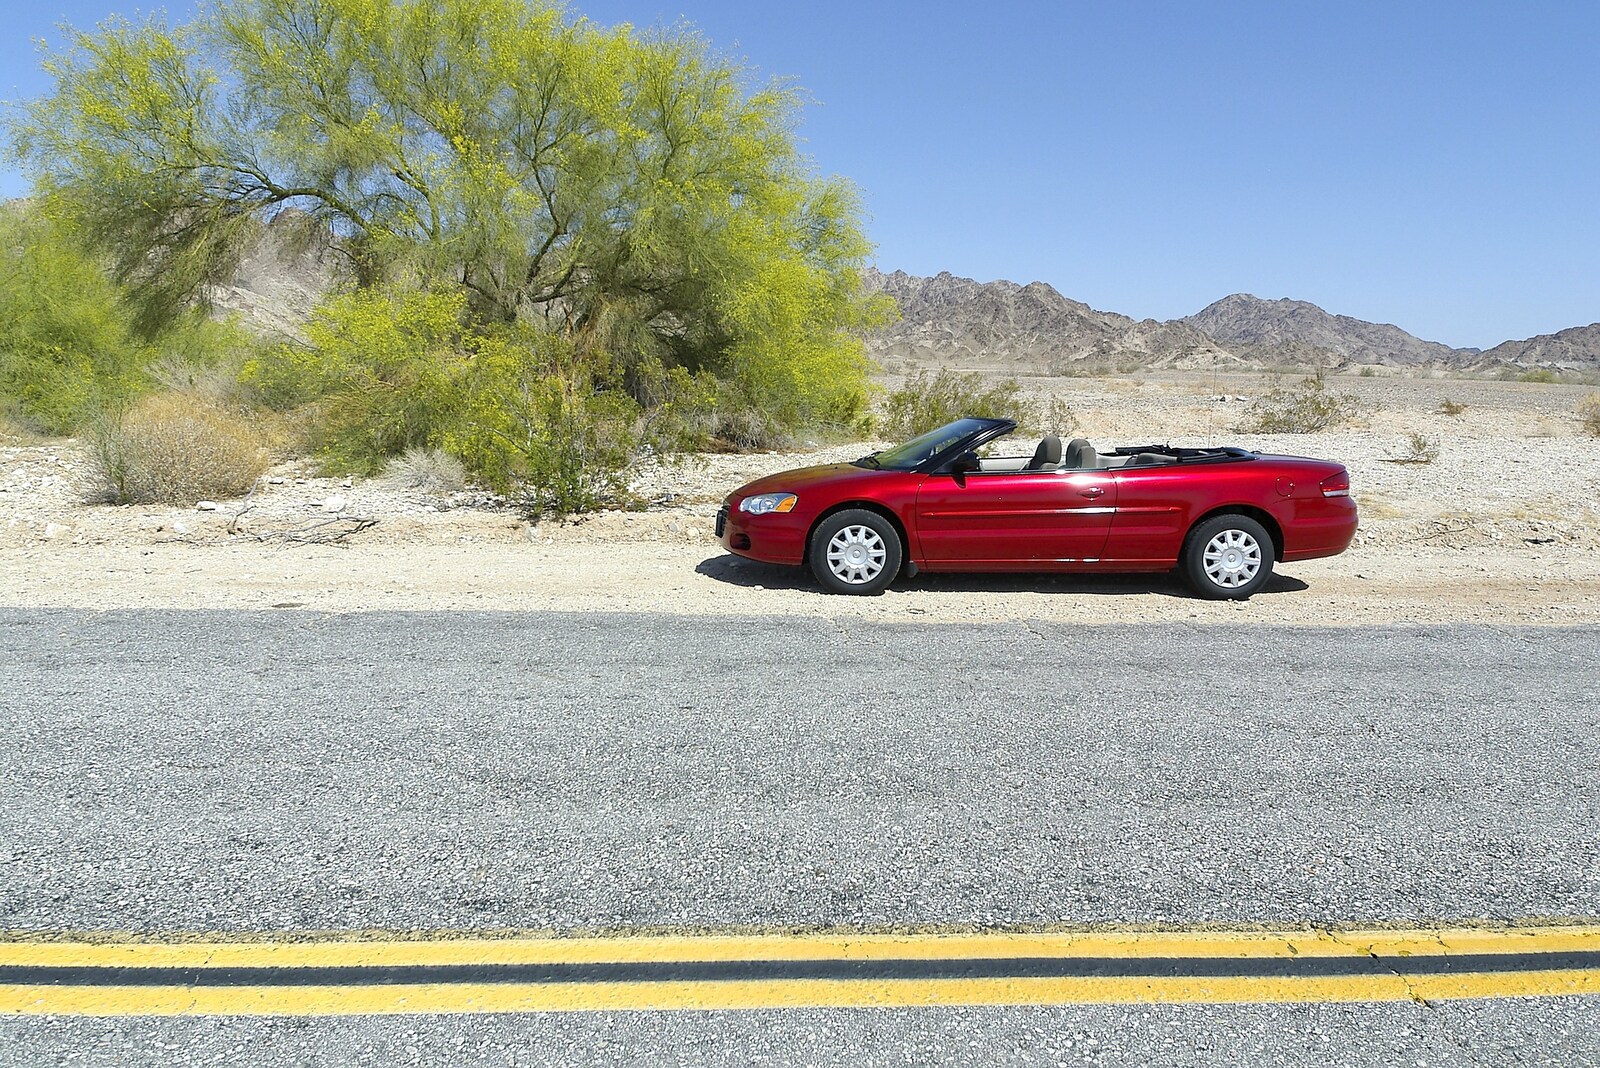 Shiny car in the desert heat on the side of S34 from San Diego Seven: The Desert and the Dunes, Arizona and California, US - 22nd April